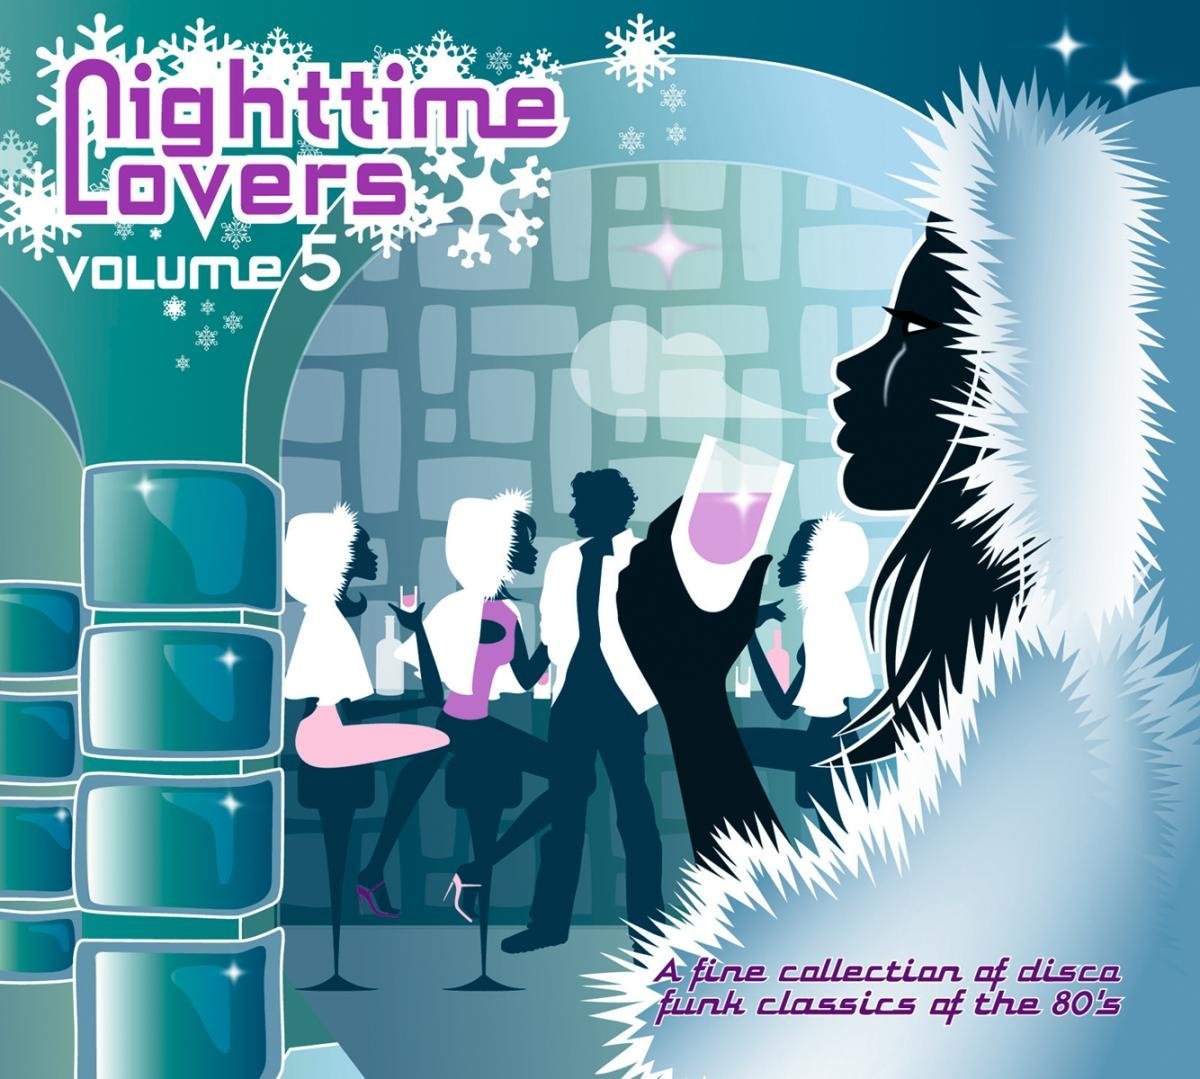 Music 5 love. Nighttime lover. Back to Love Vol. 5.